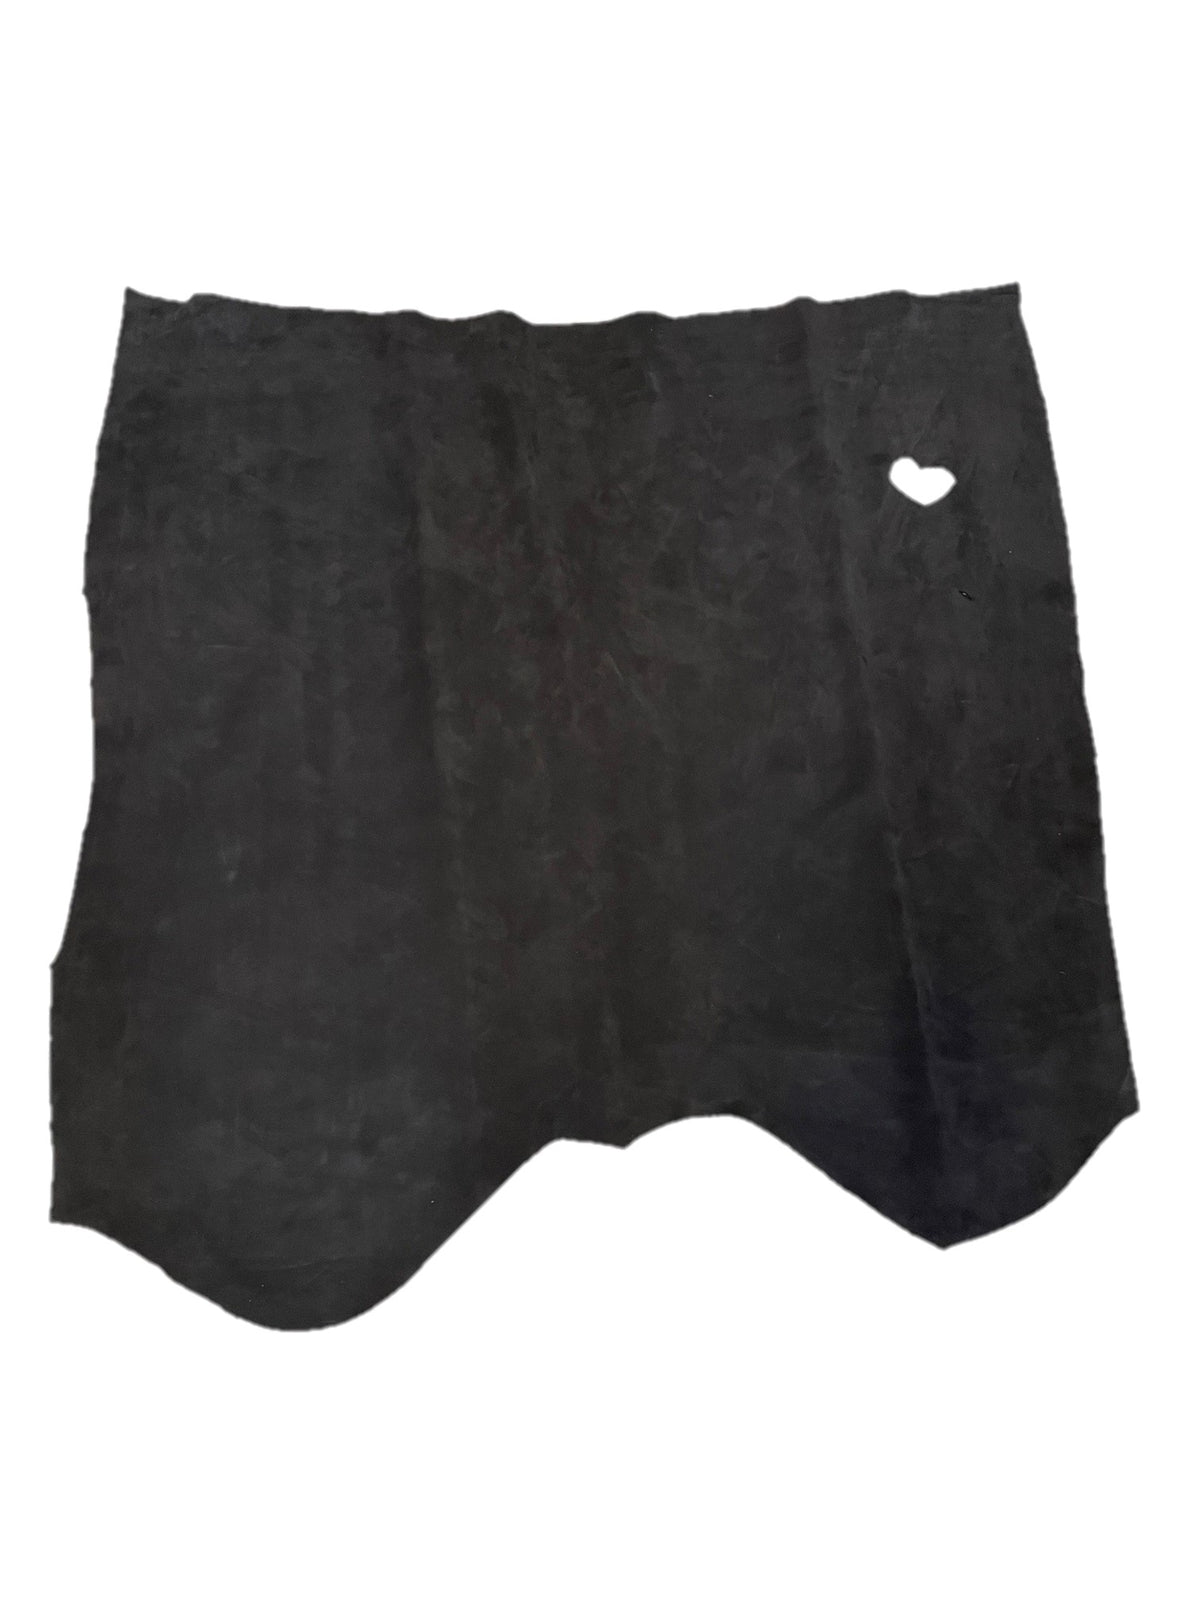 Heavy Cow Jersey Suede Double Butts | Black | 2.2 mm | 18 sq.ft | From $155 ea.